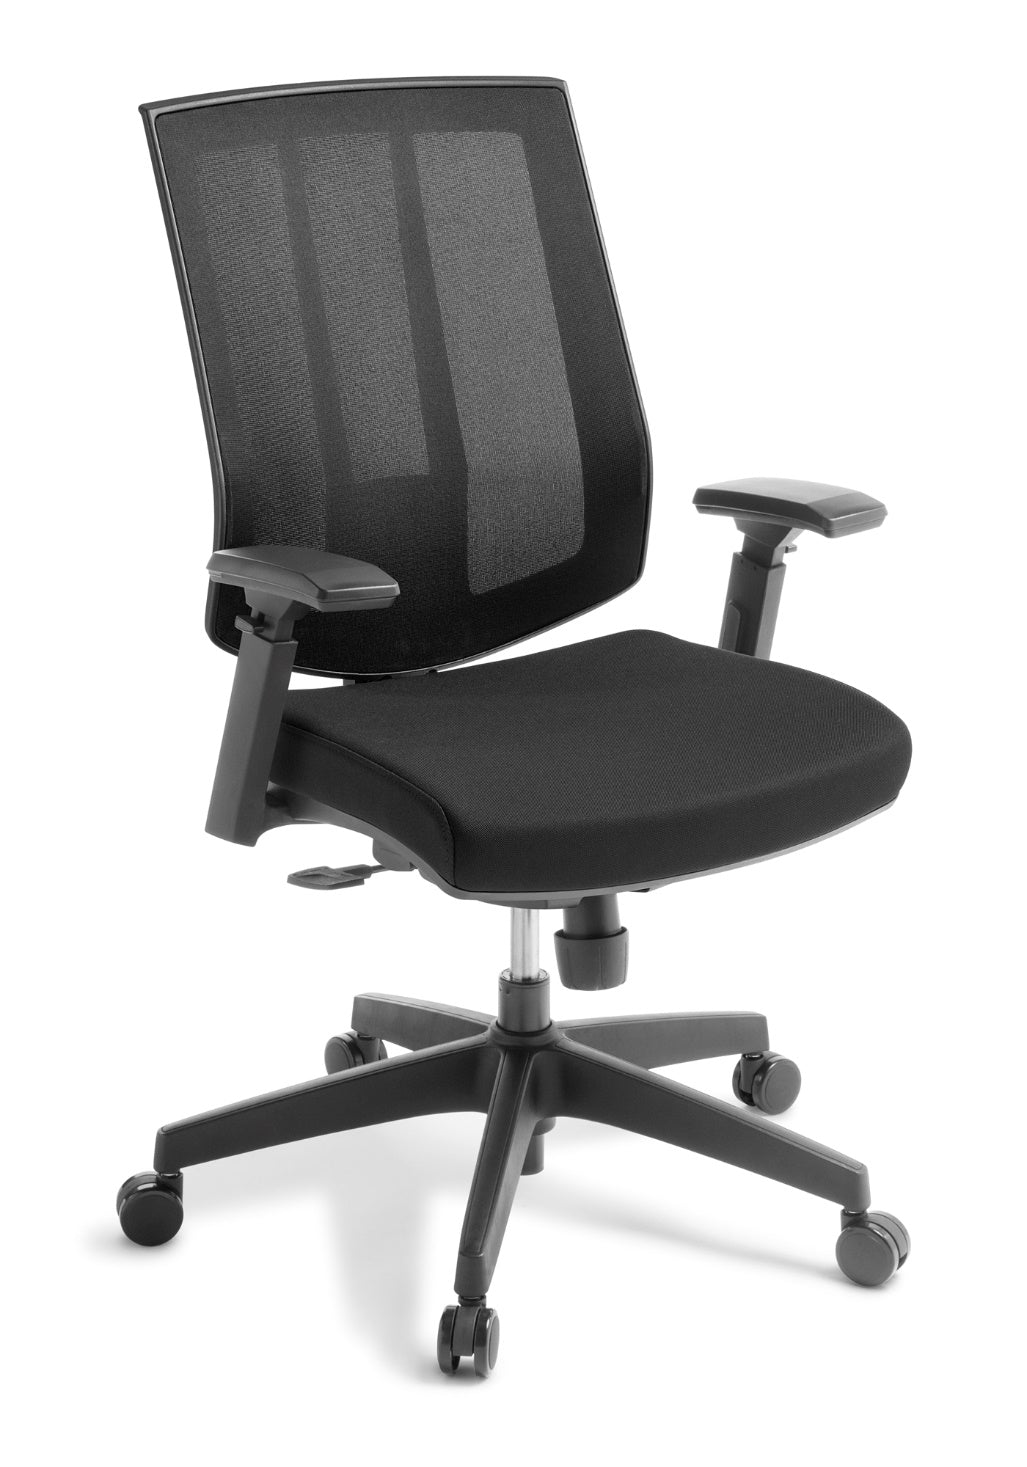 Eden rally office chair with arm rest option